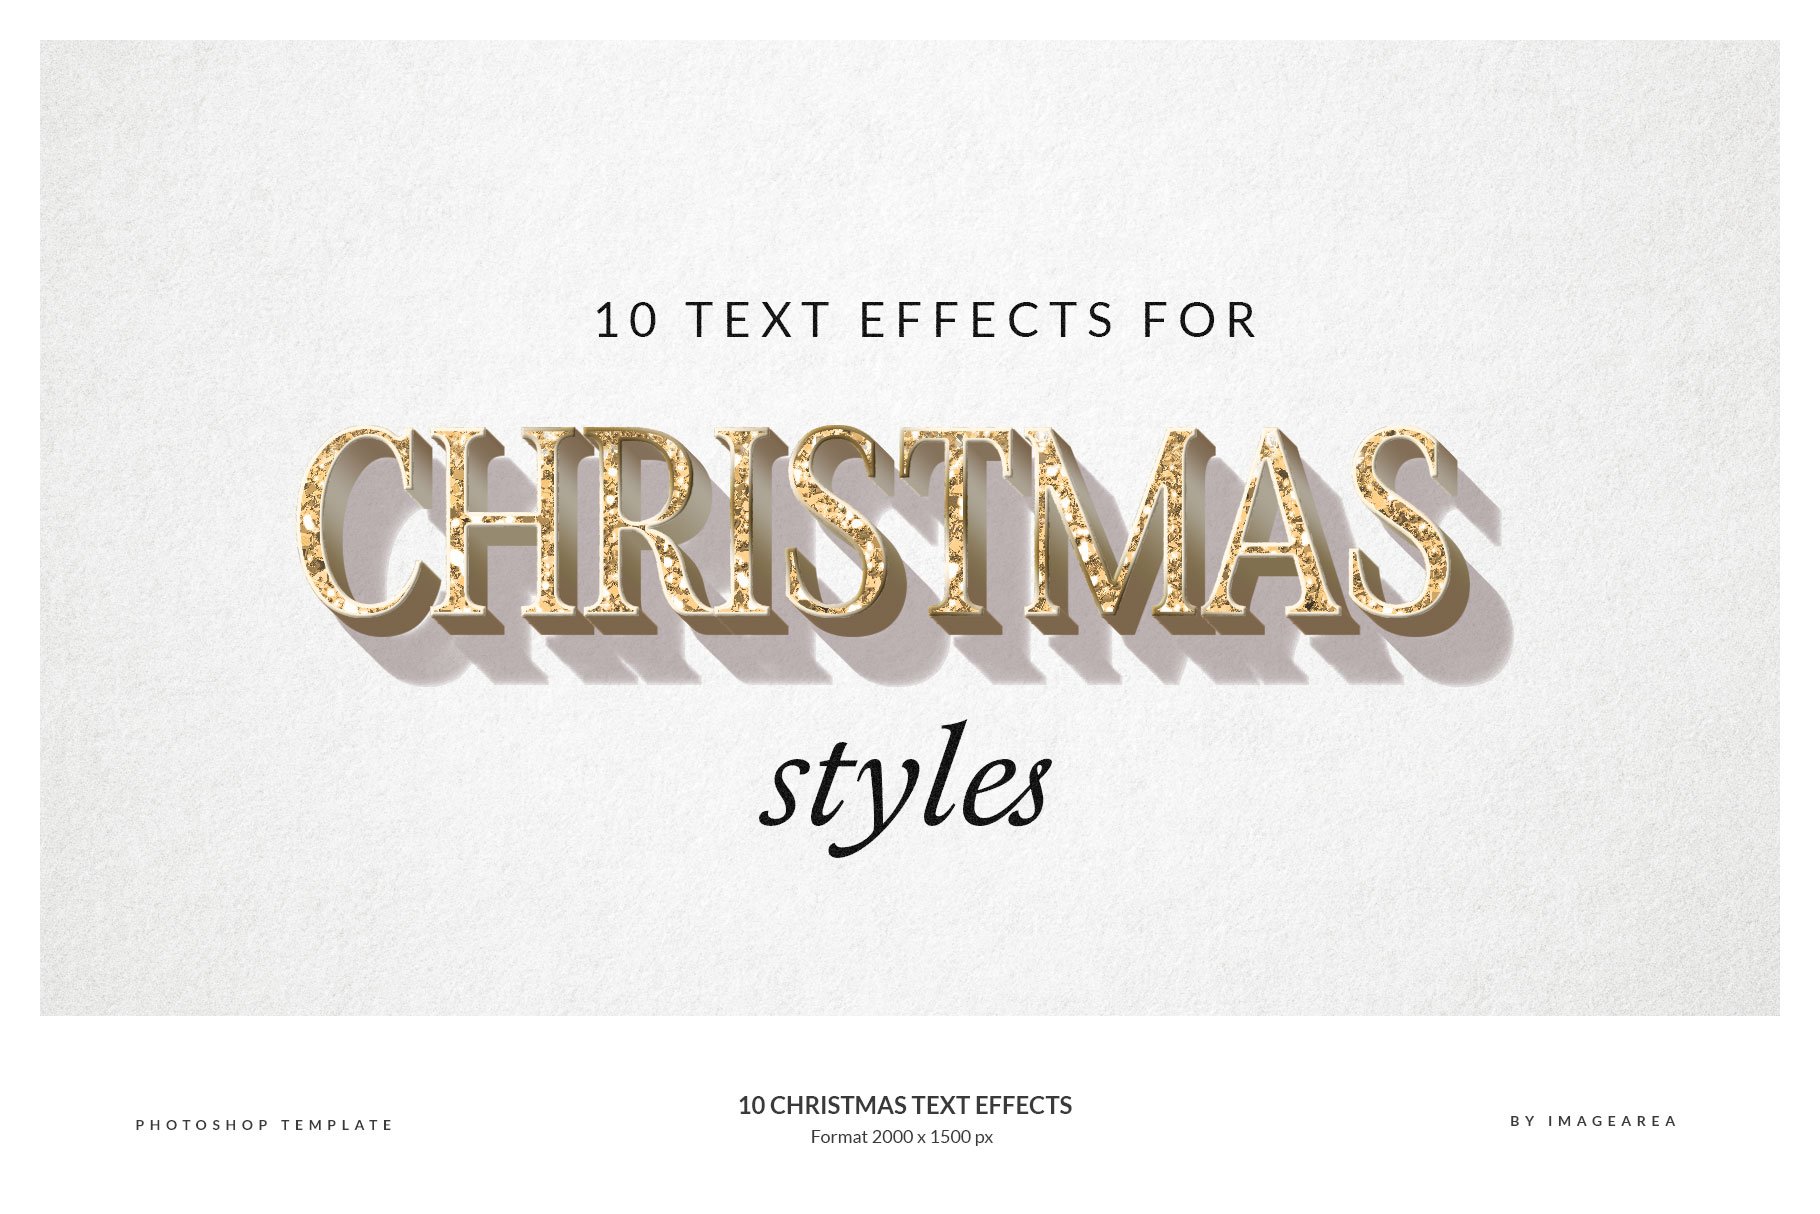 Christmas Text Effectscover image.